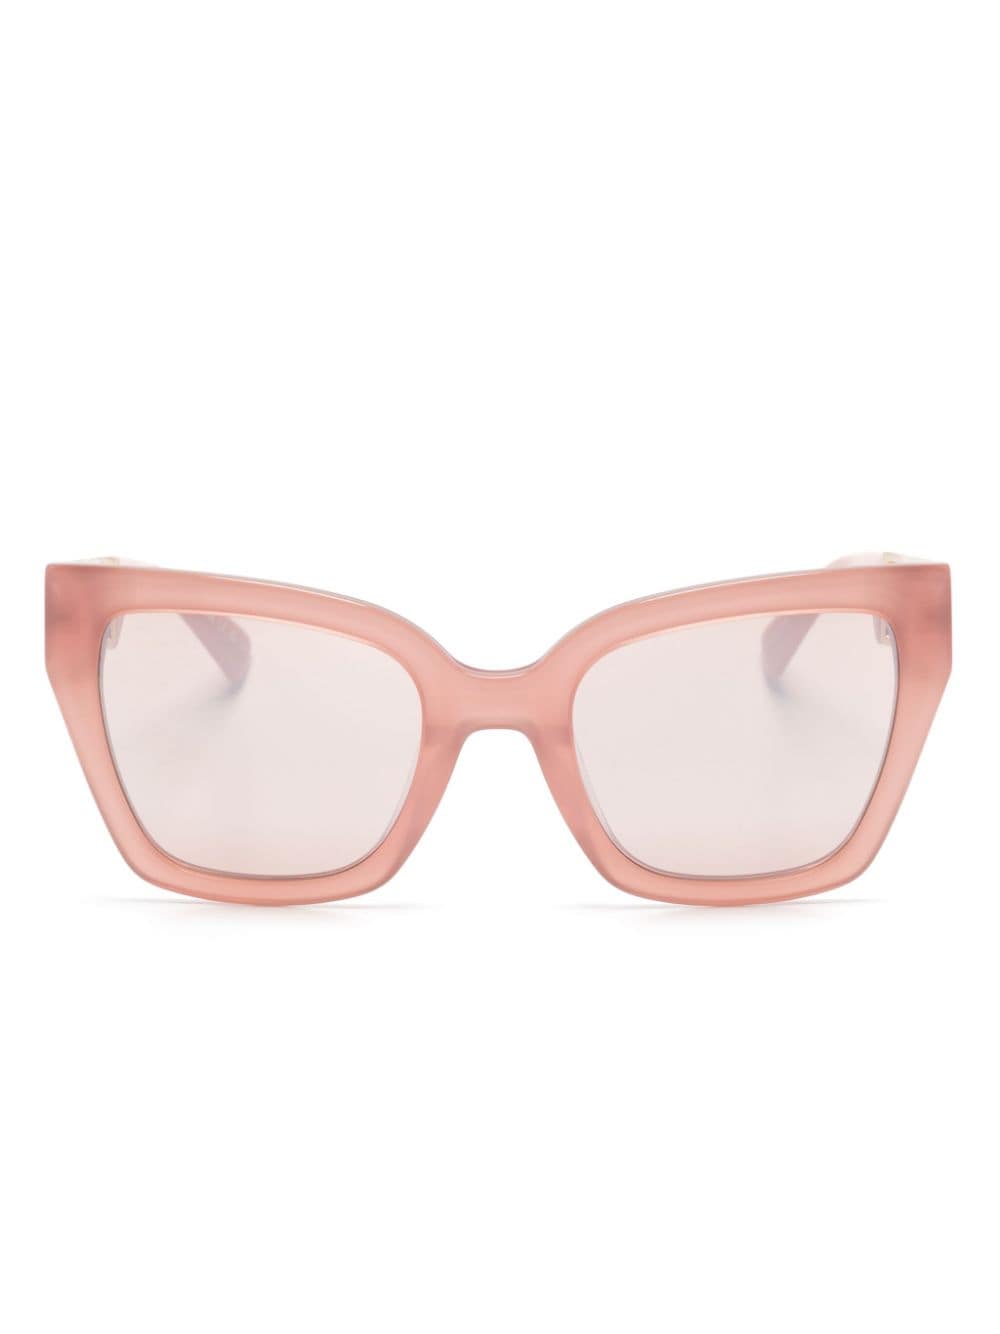 butterfly-frame sunglasses